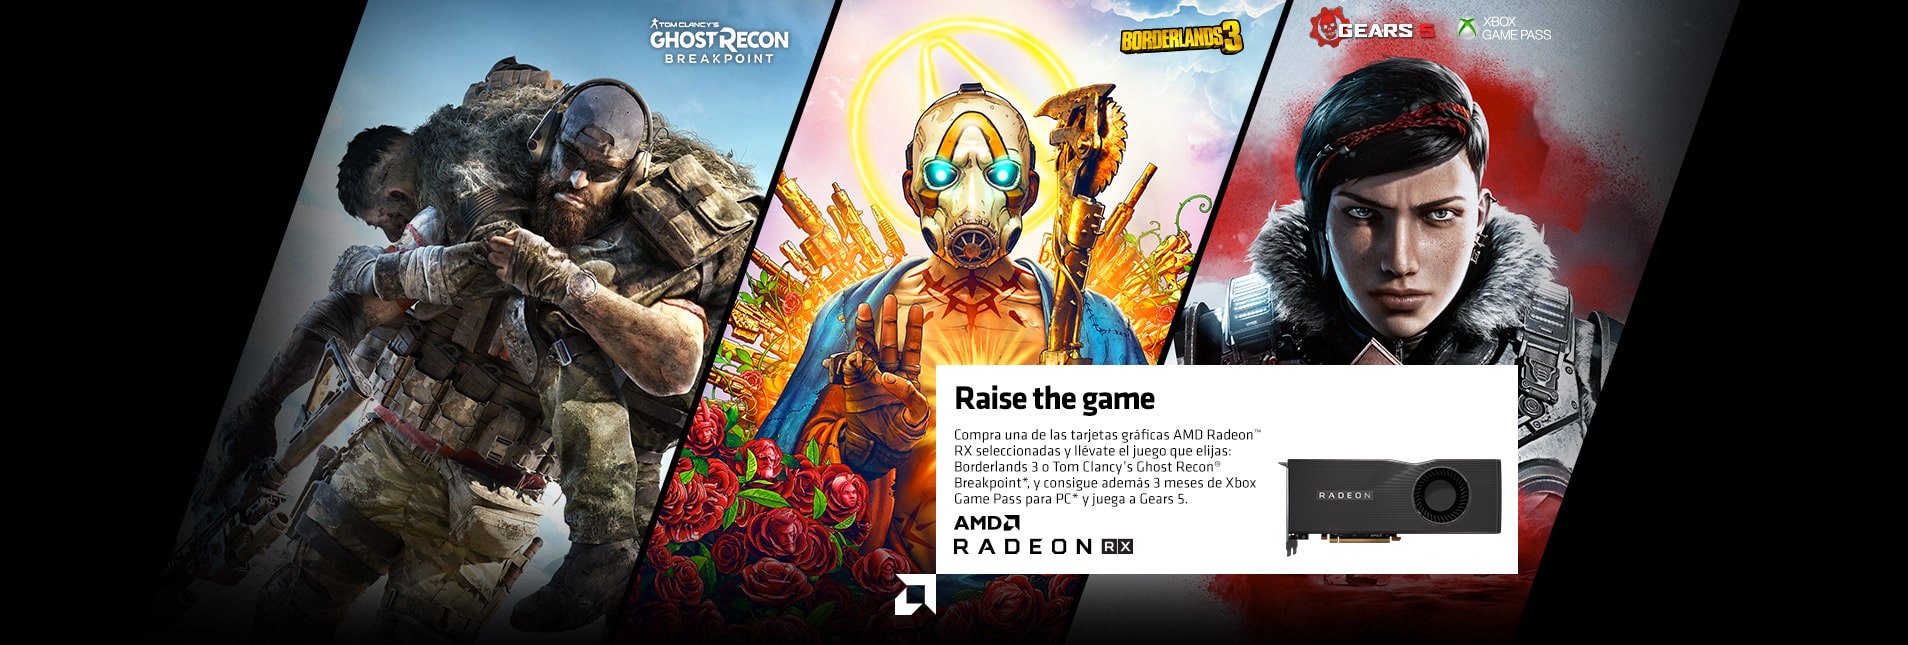 AMD  Raise the game  Consigue Tom Clancy039s Ghost Recon Breakpoint o Borderlands 3